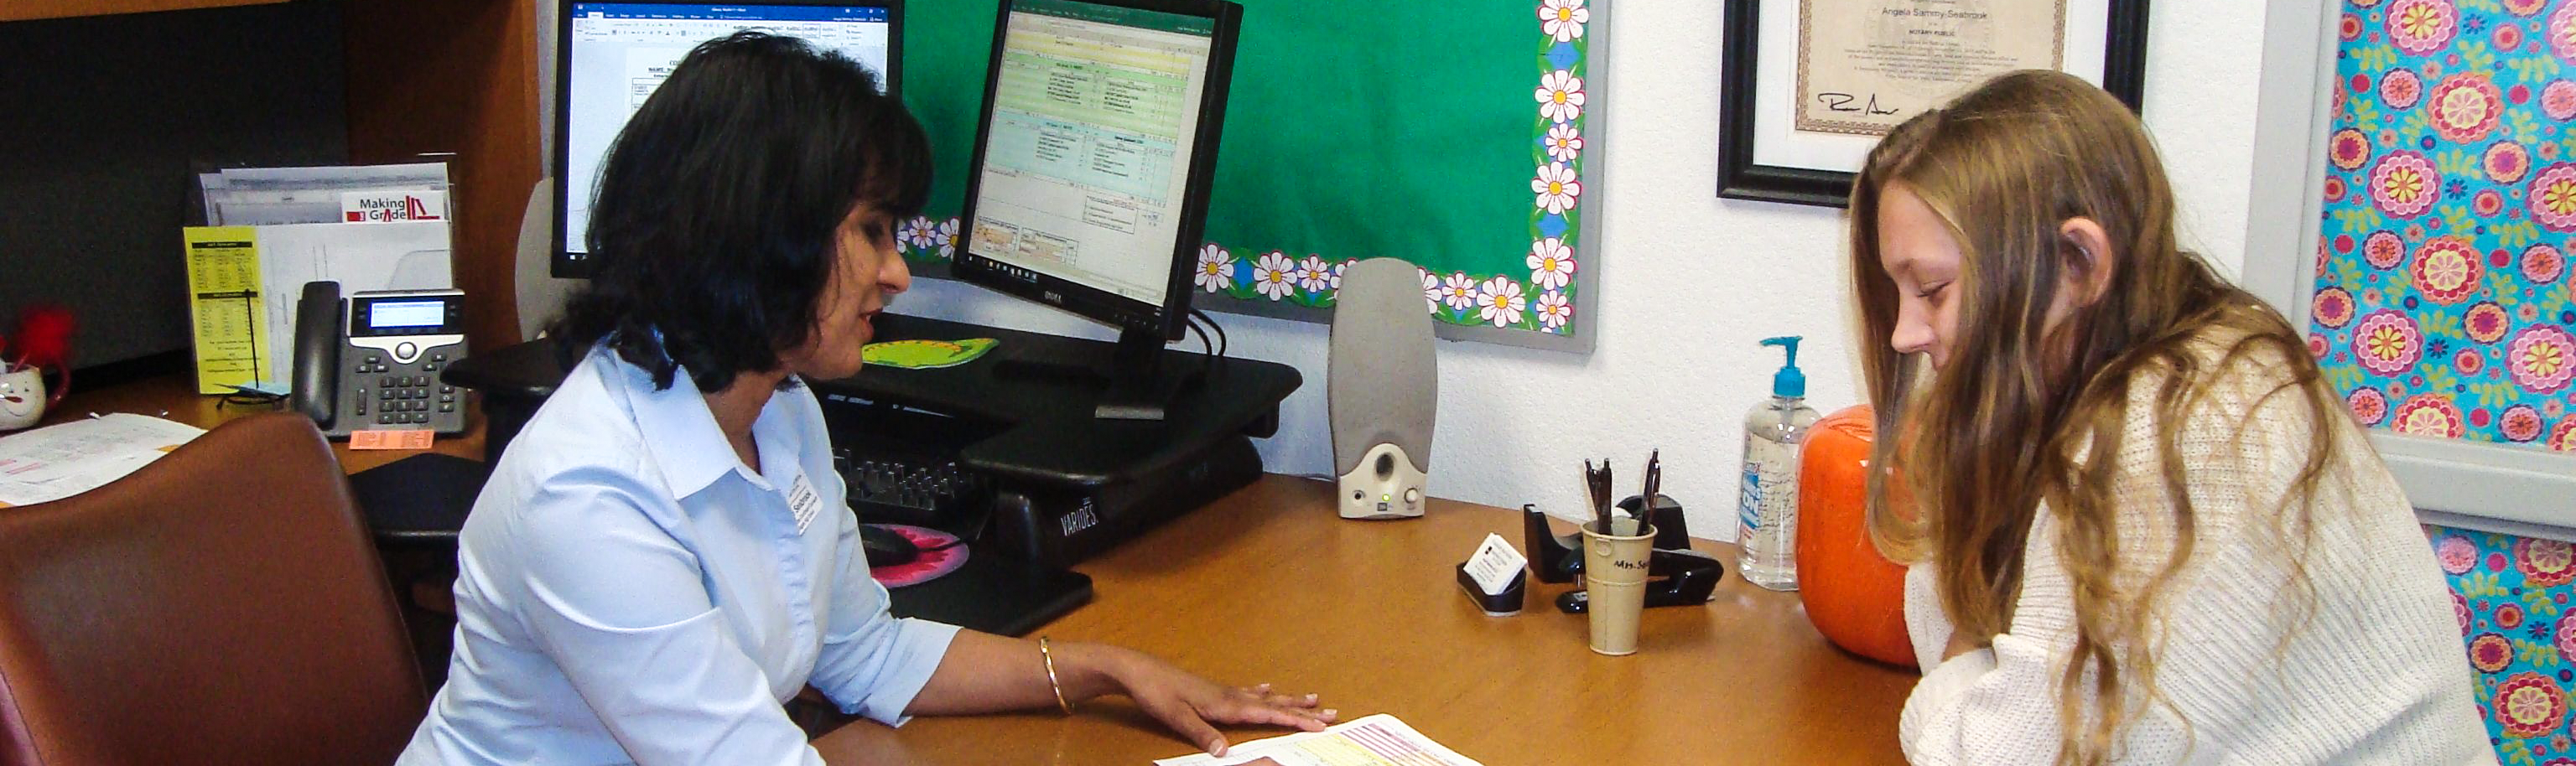 Counselor talking to a teen student at office